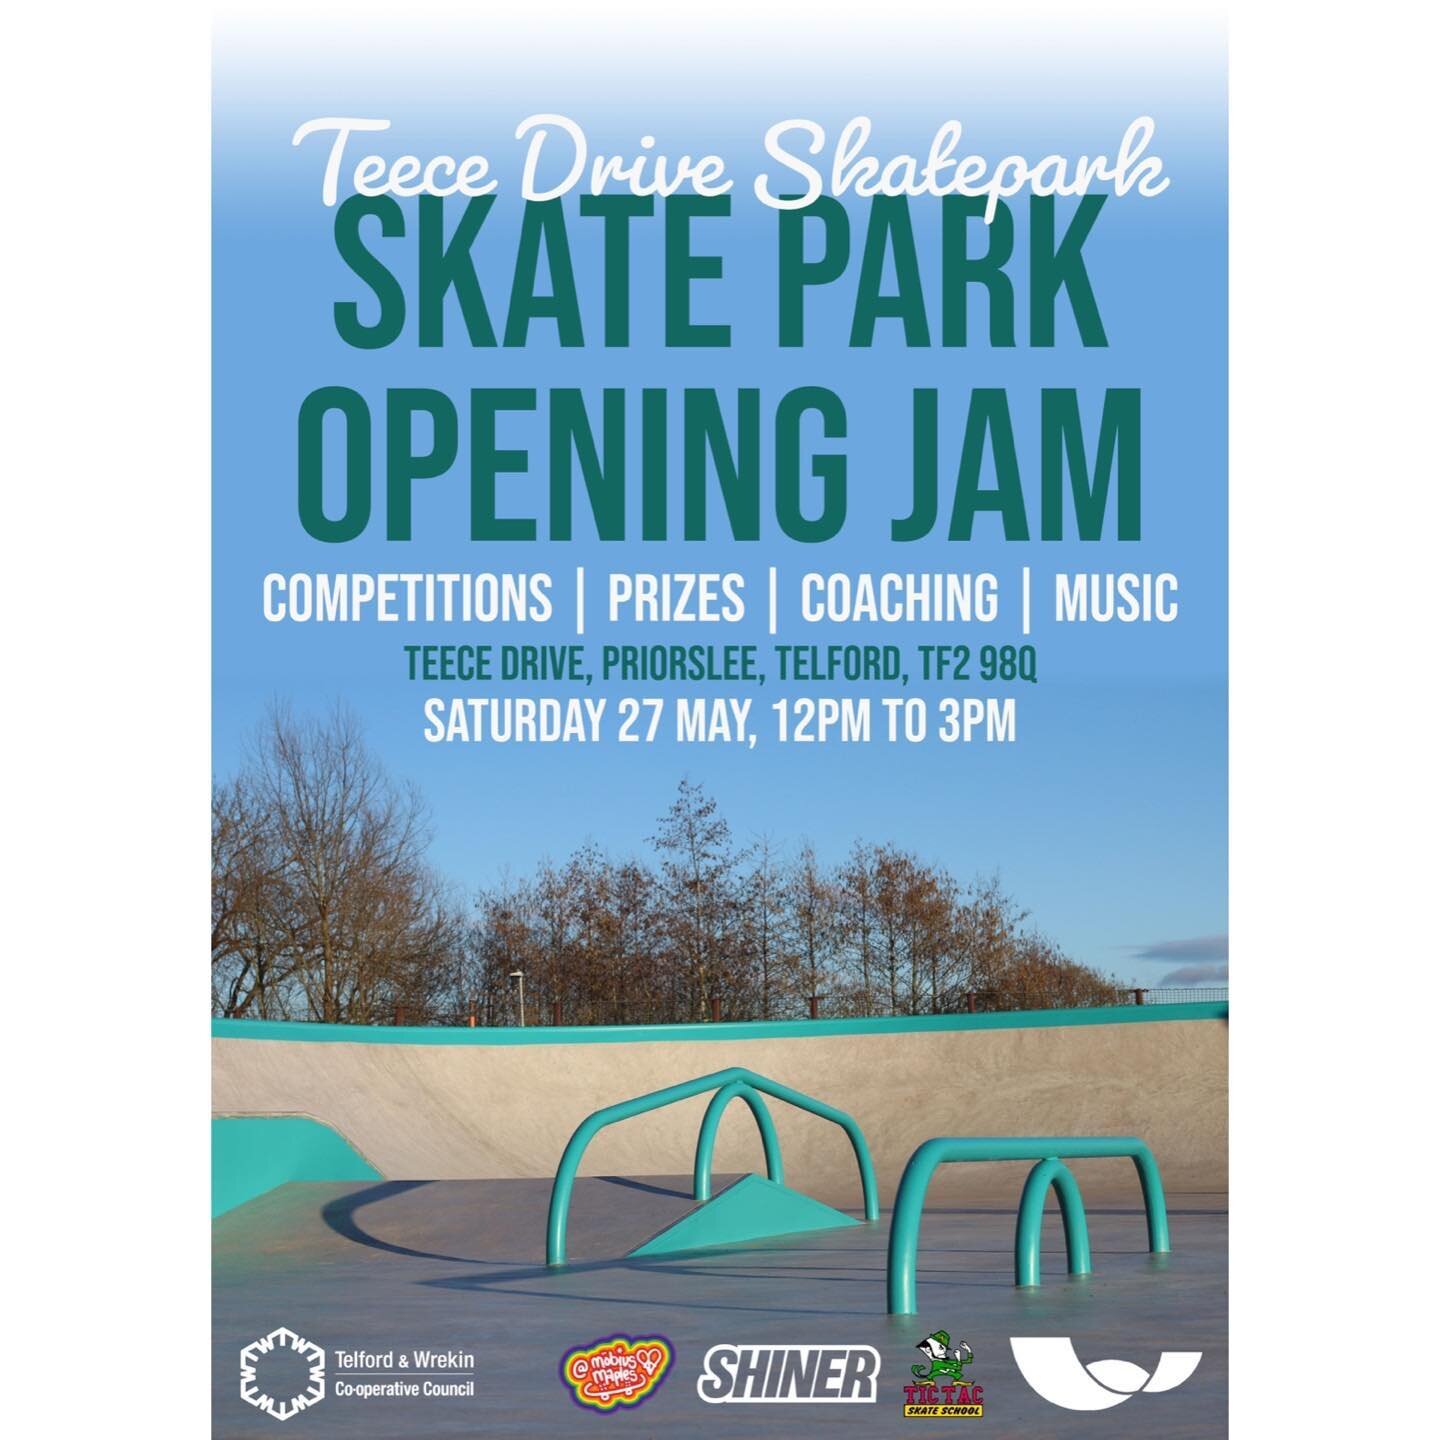 #TeeceDriveSkatepark Official Opening Jam is taking place on Saturday 27th May from 12:00-3:00pm 🎉 Teece Drive, Priorslee, Telford, TF2 9Q8 &bull;
&bull;
&bull; 
#wheelscape #wheelscapeltd #wheelscapeskateparks #socialspaces #getactive #skateparkdes